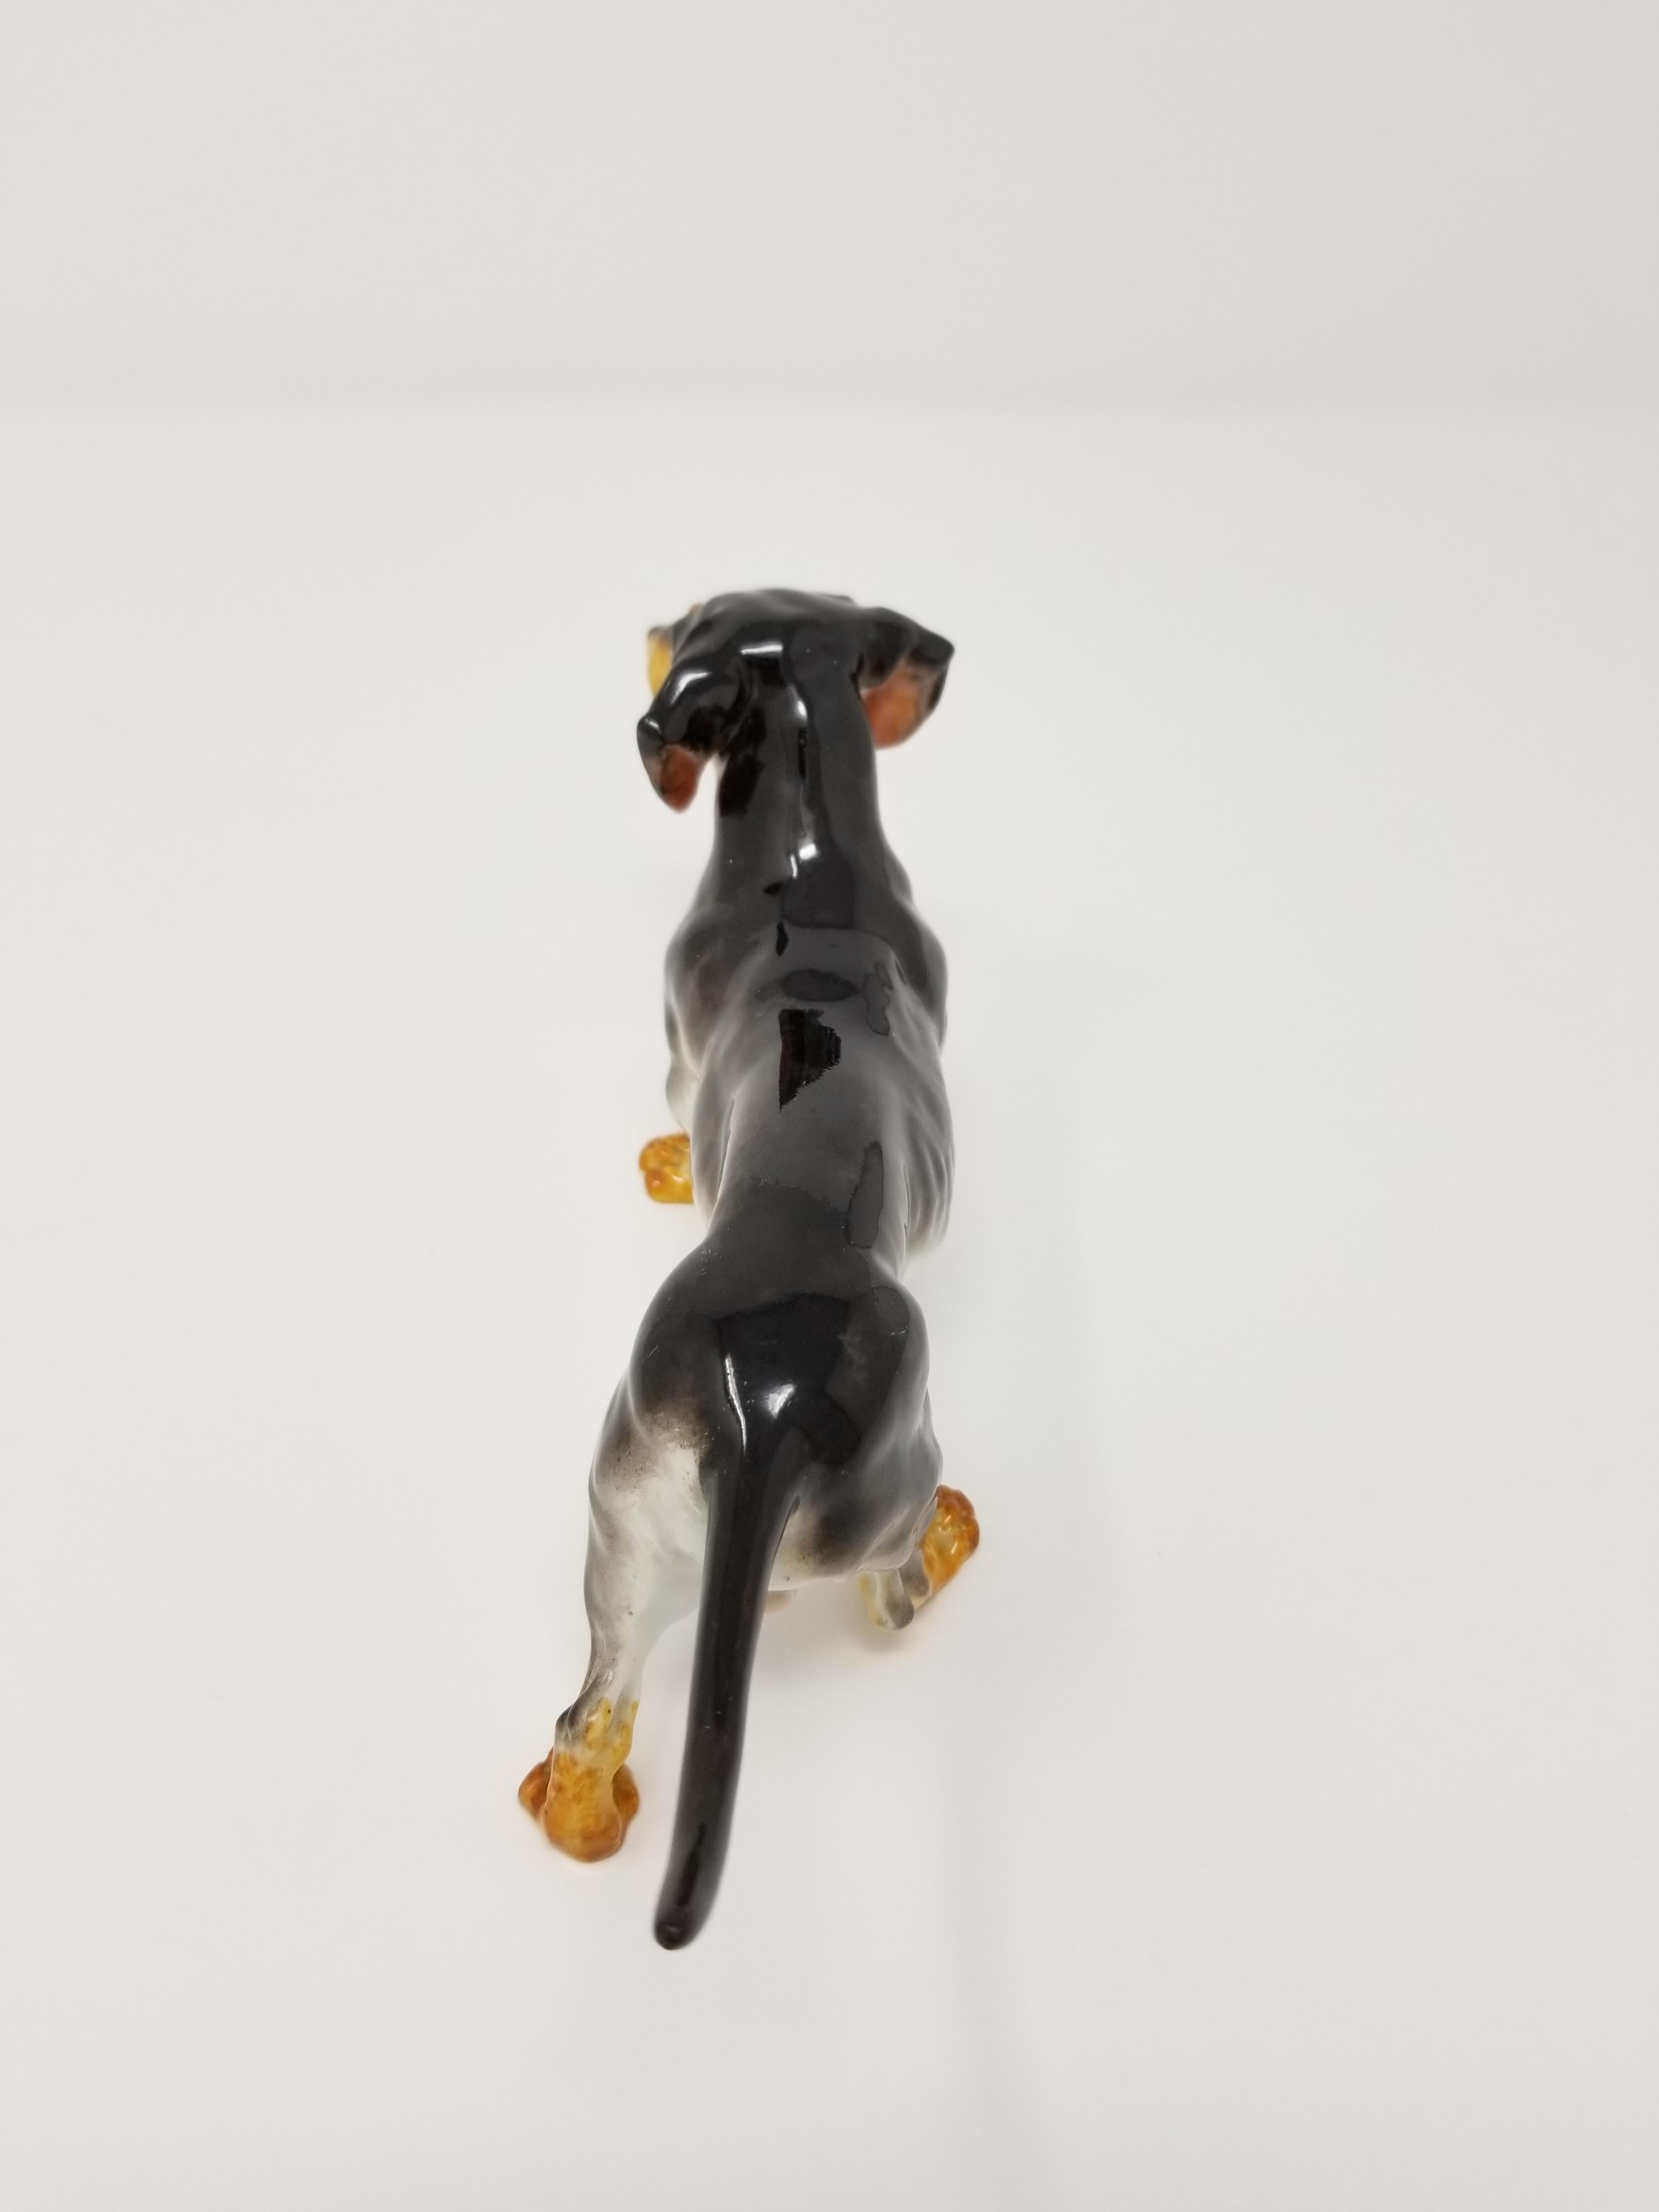 An Antique Meissen Porcelain figure of a Dachshund dog, with double blue crossed swords mark under-glaze. This is a very well portrayed Dachshund dog figure with beautifully hand painted black upper fur, brown facial fur, and pure white underside